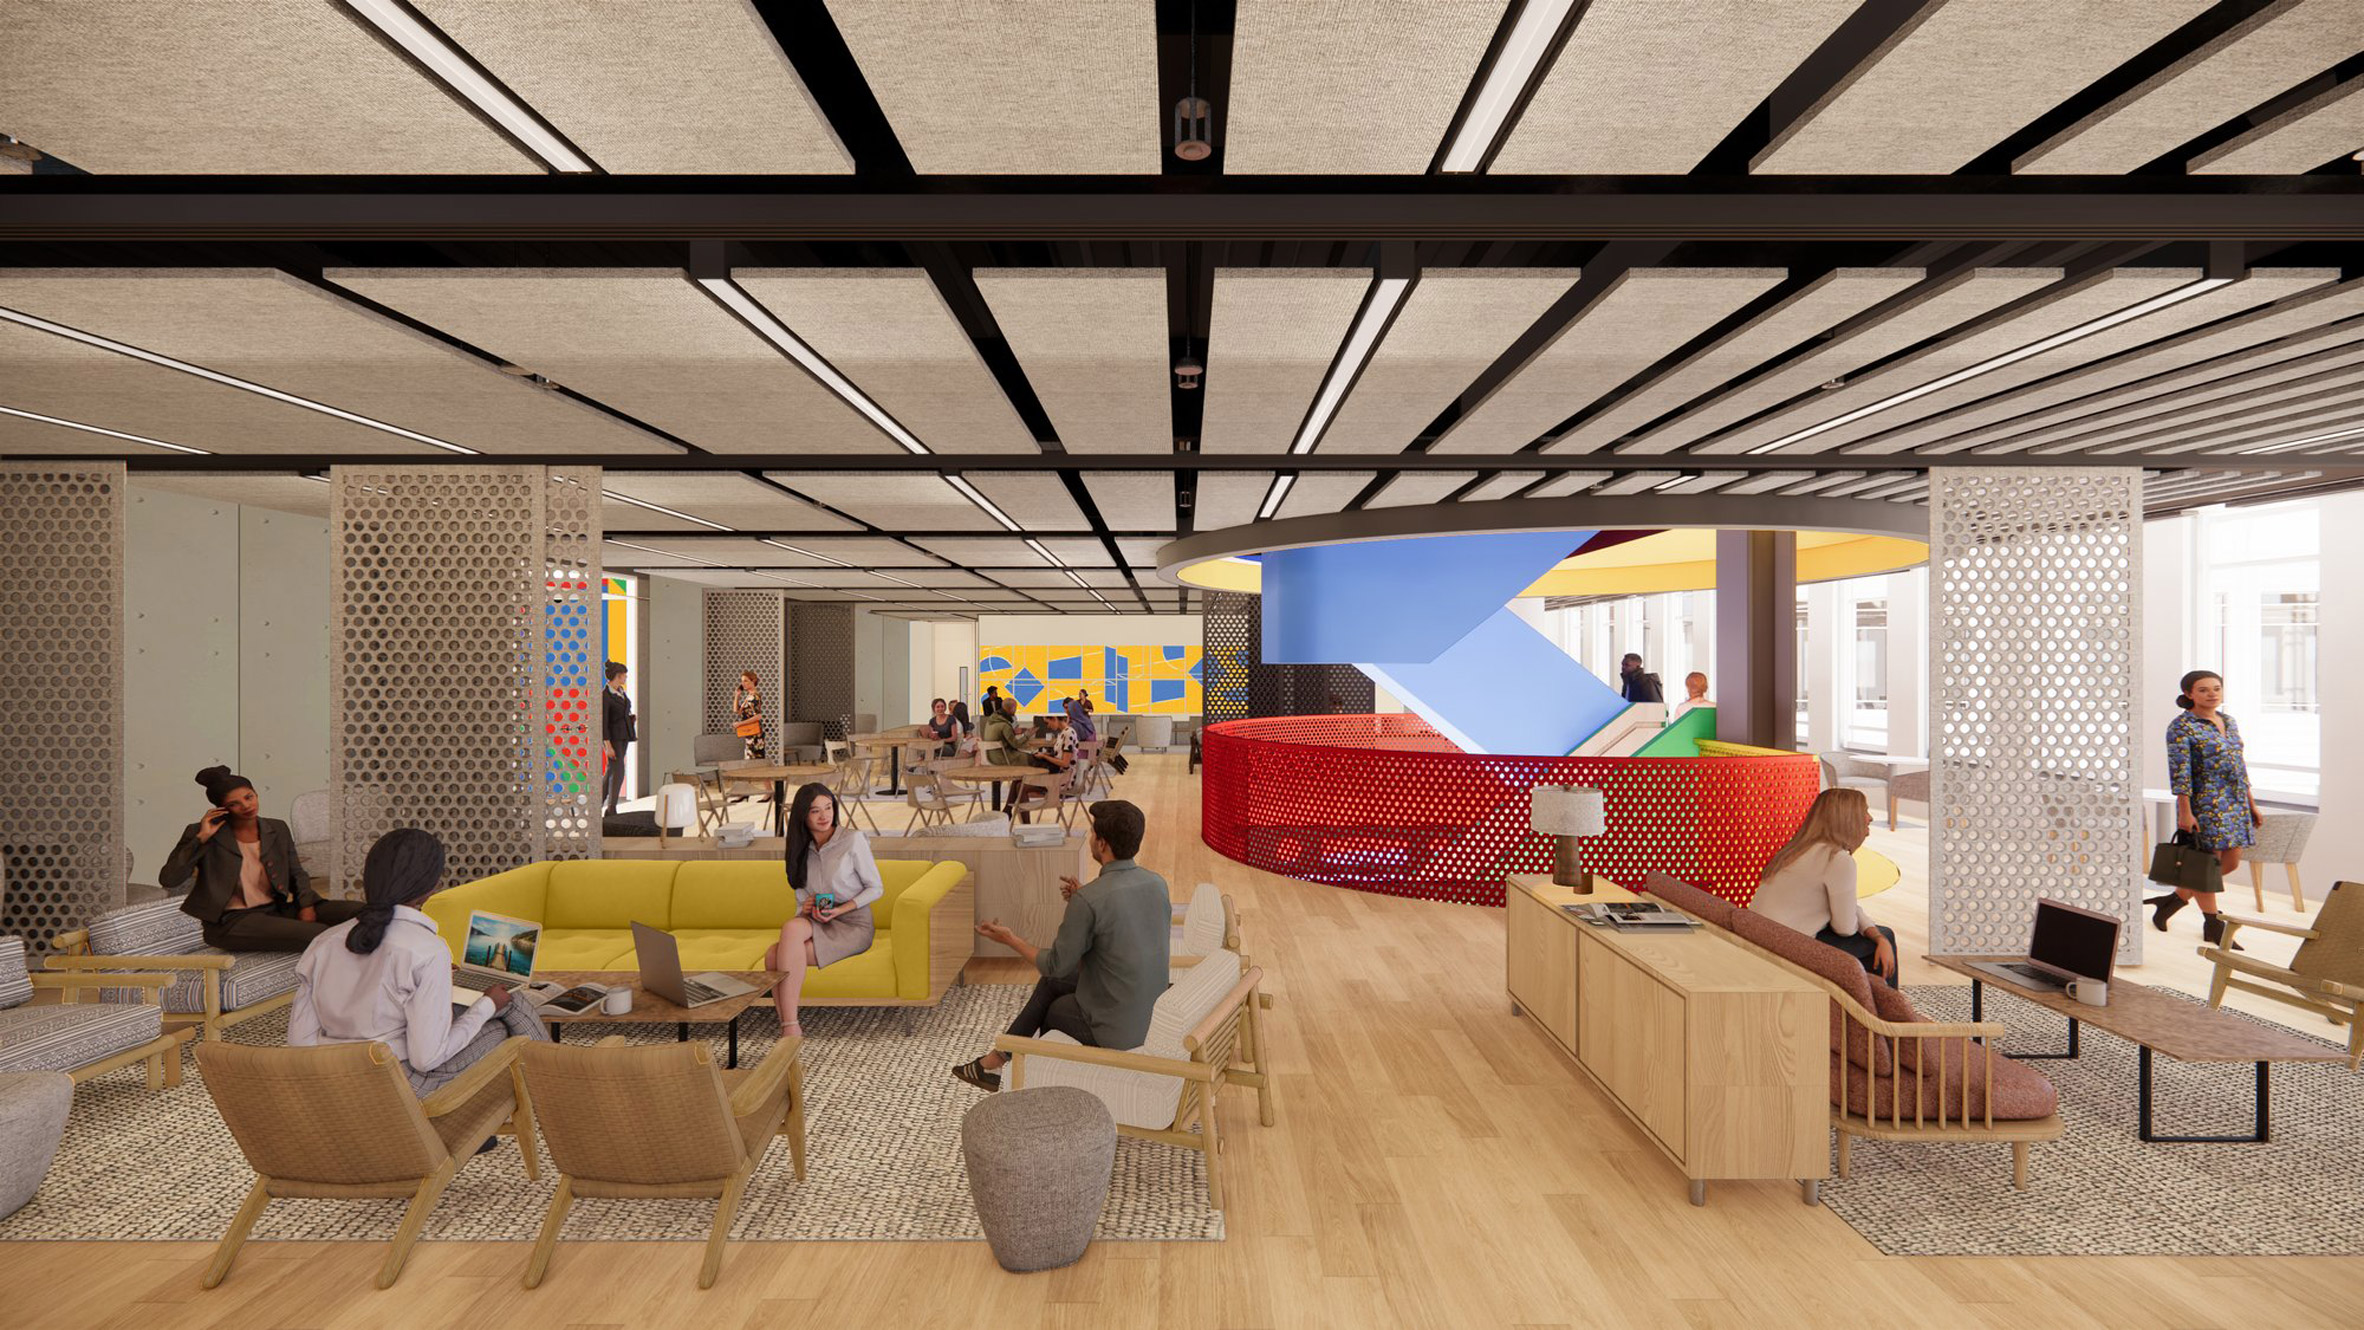 Google buys Renzo Piano's Central Saint Giles for London office